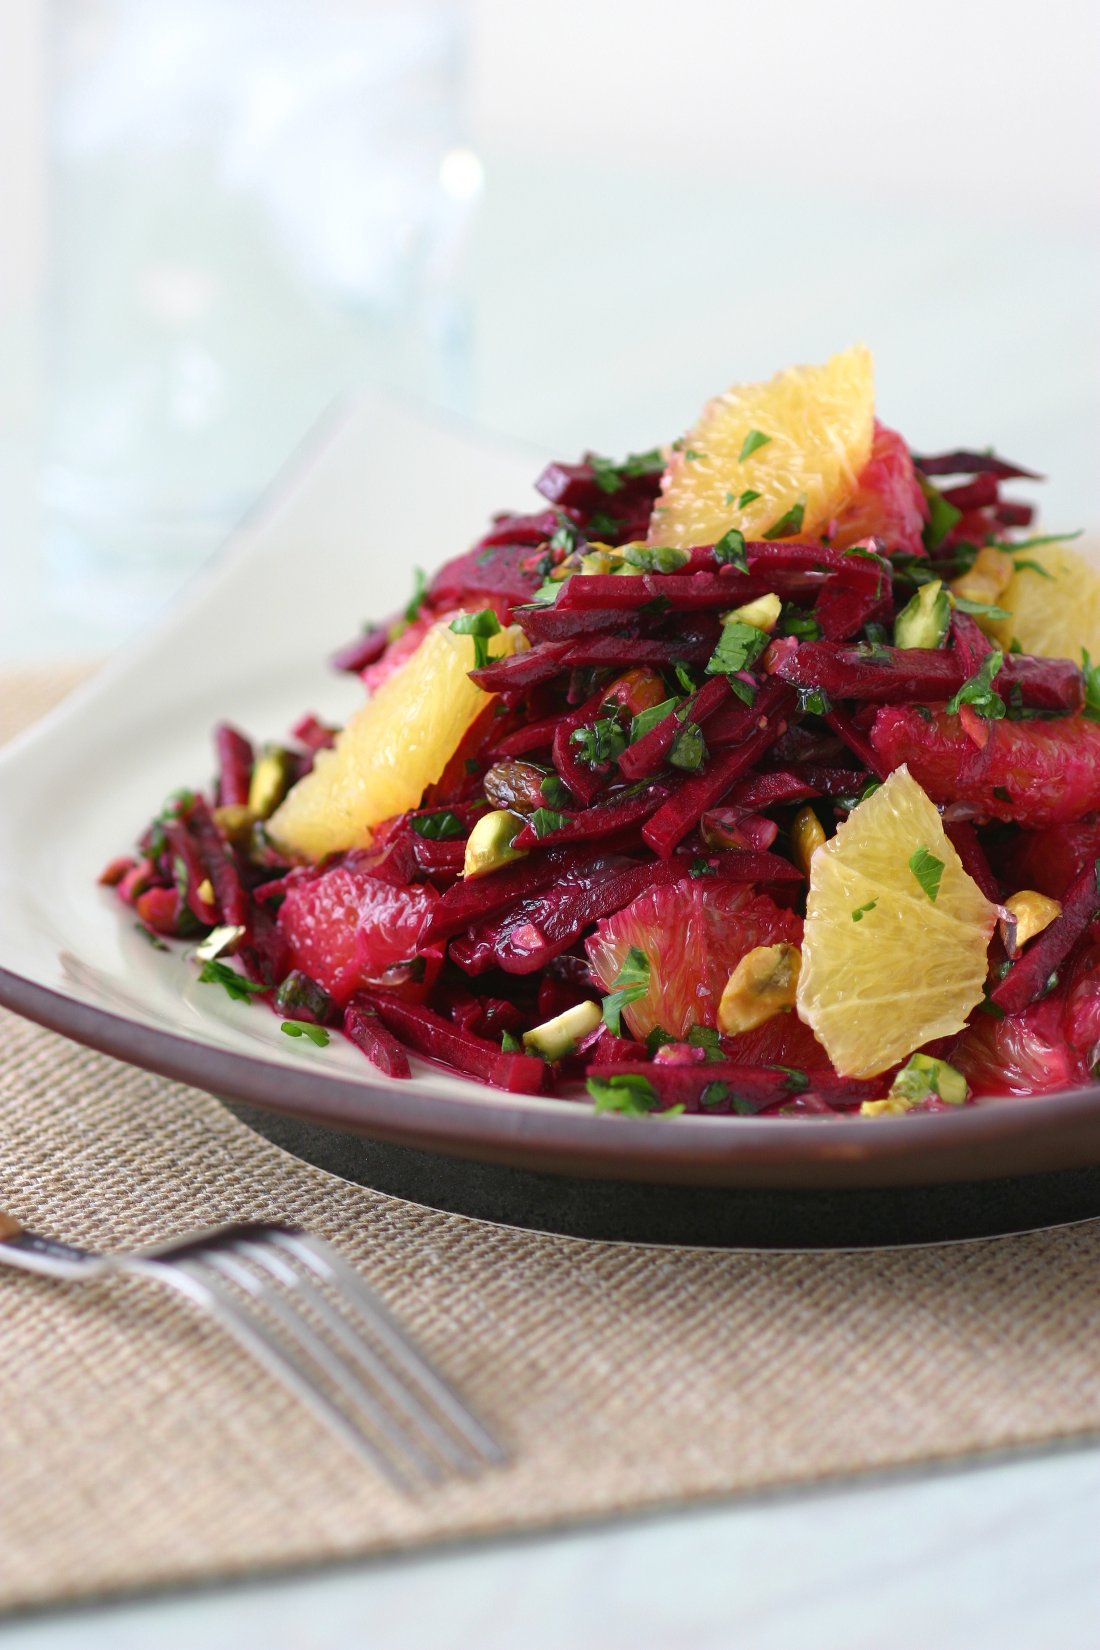 This recipe for Raw Beet Salad with oranges and pistachios has a sweet, earthy flavor and a toothy chew.